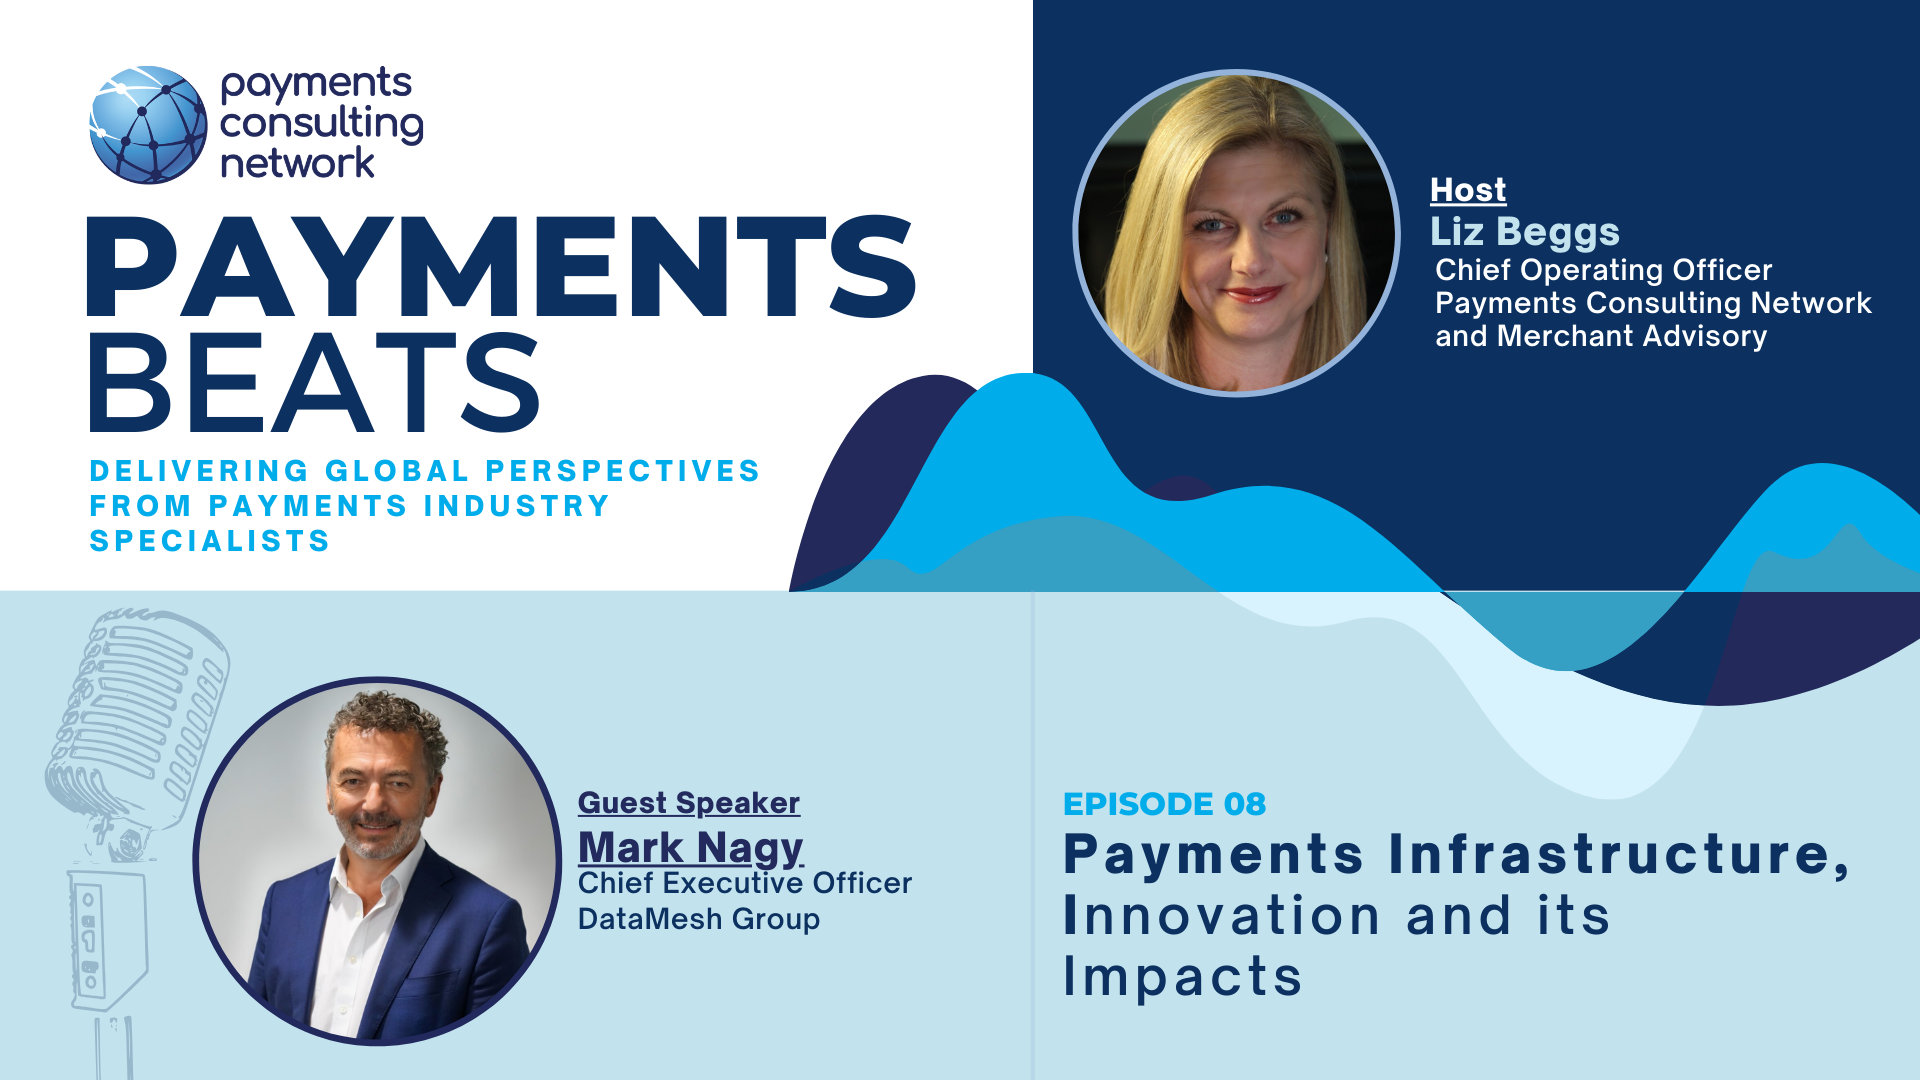 Payments infrastructure